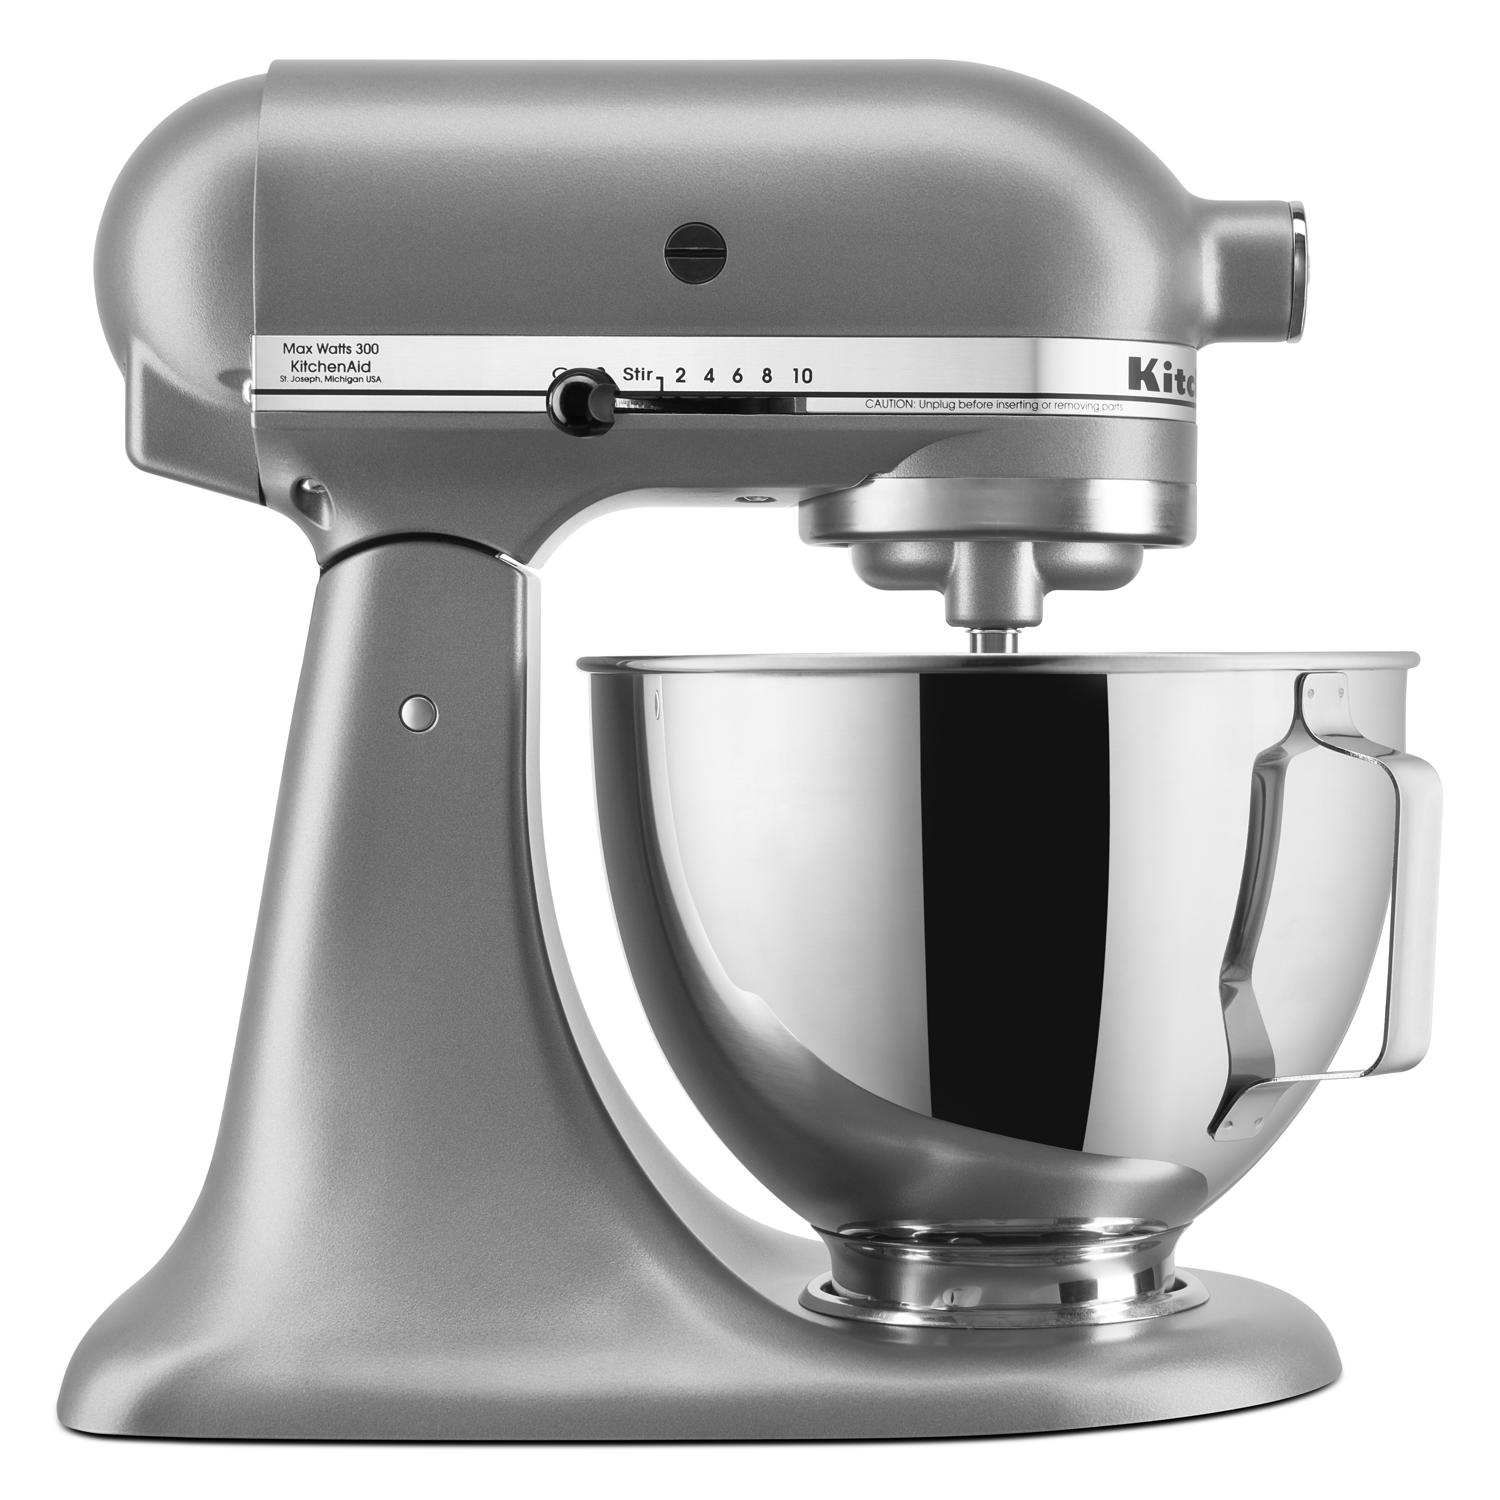  KitchenAid 6 Speed Hand Mixer with Flex Edge Beaters - KHM6118  & Variable Speed Corded Hand Blender - KHBV53: Home & Kitchen